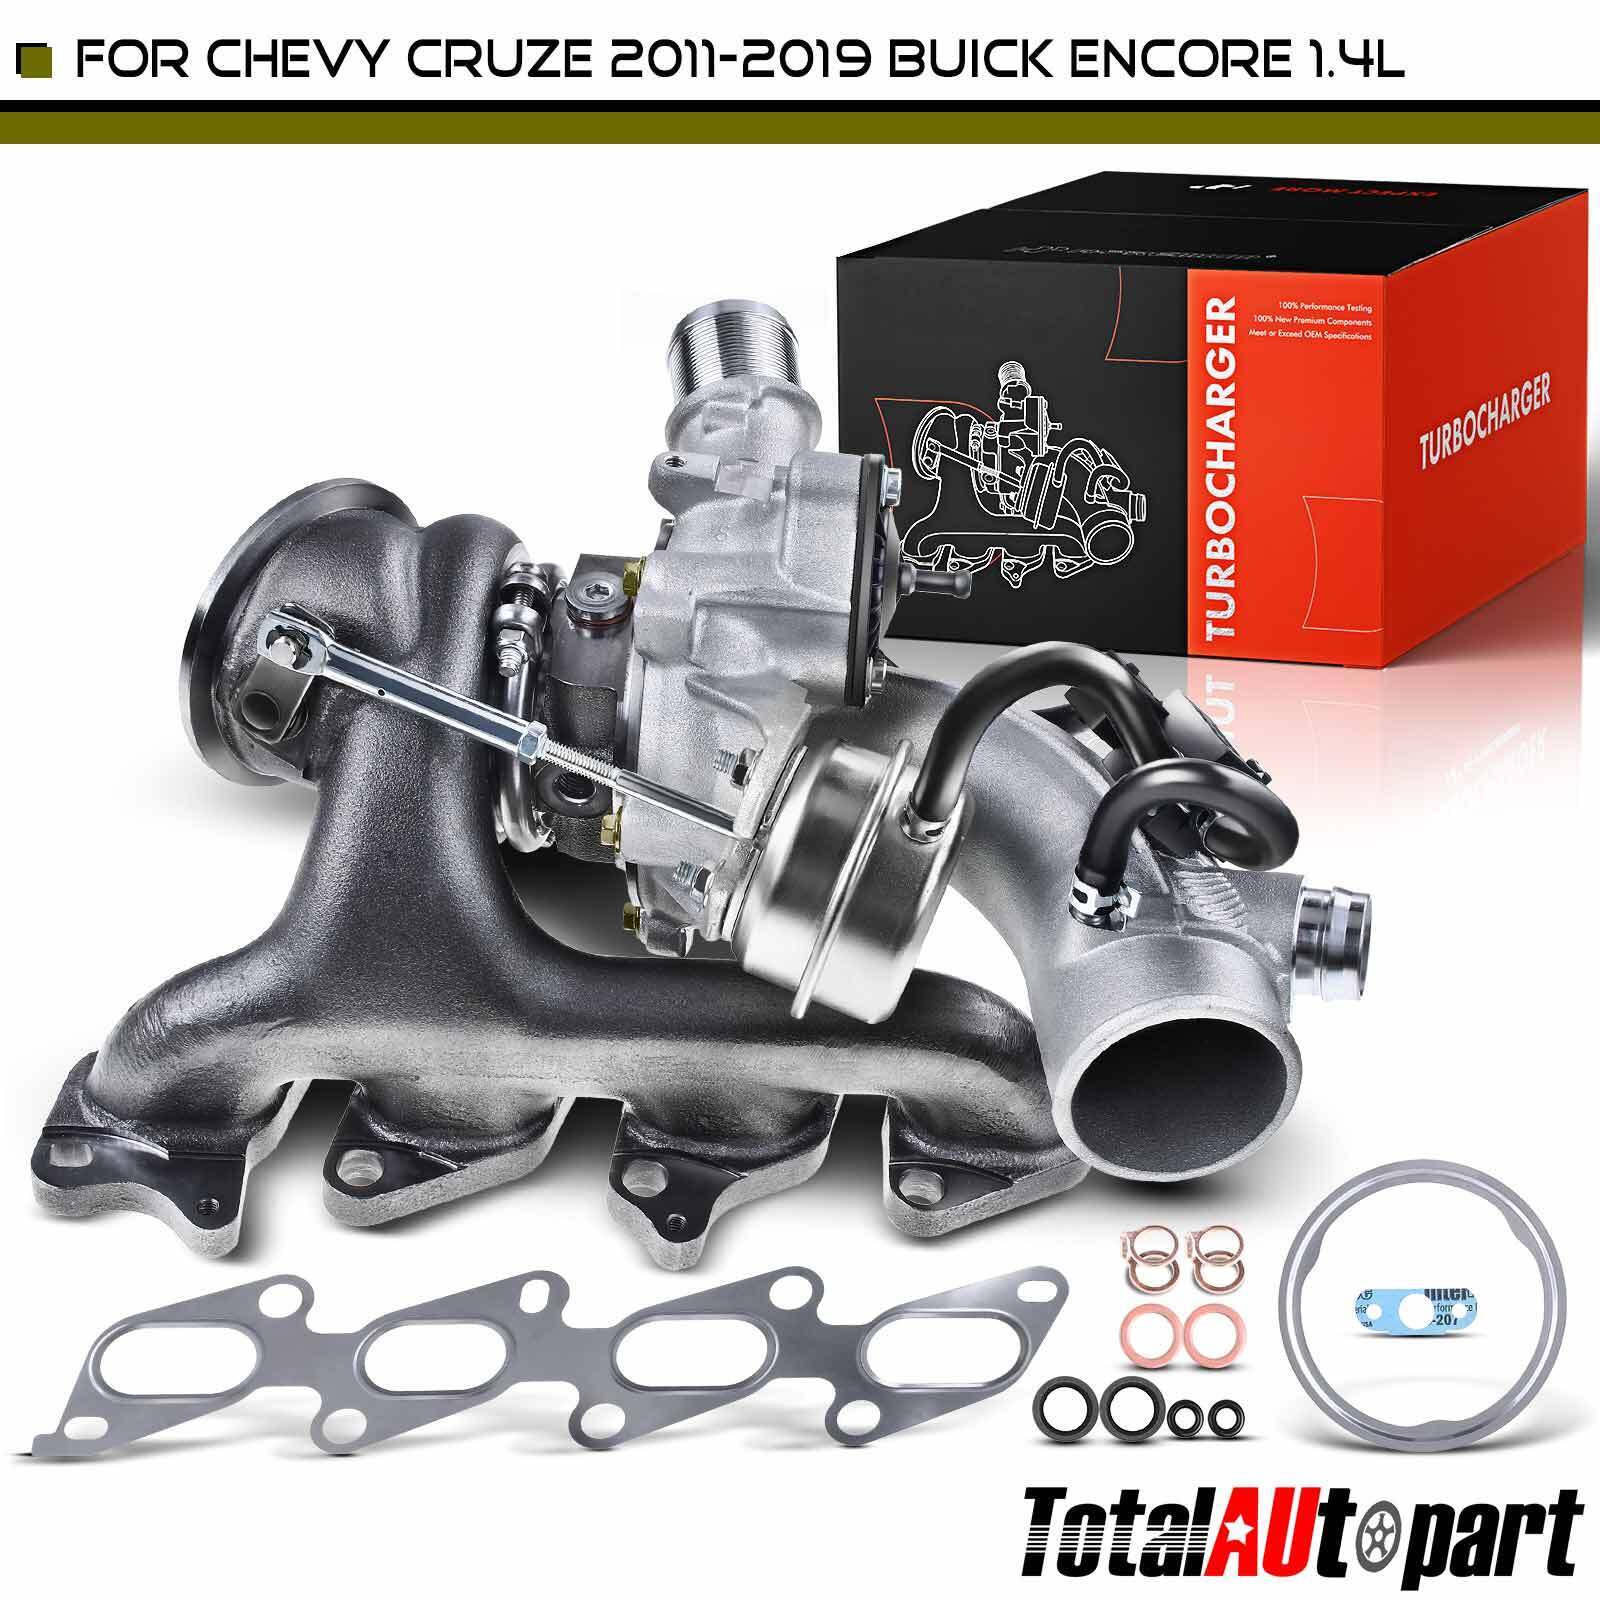 Turbo Turbocharger for Chevy Cruze 11-19 Sonic Trax Buick Encore 1.4L 55565353